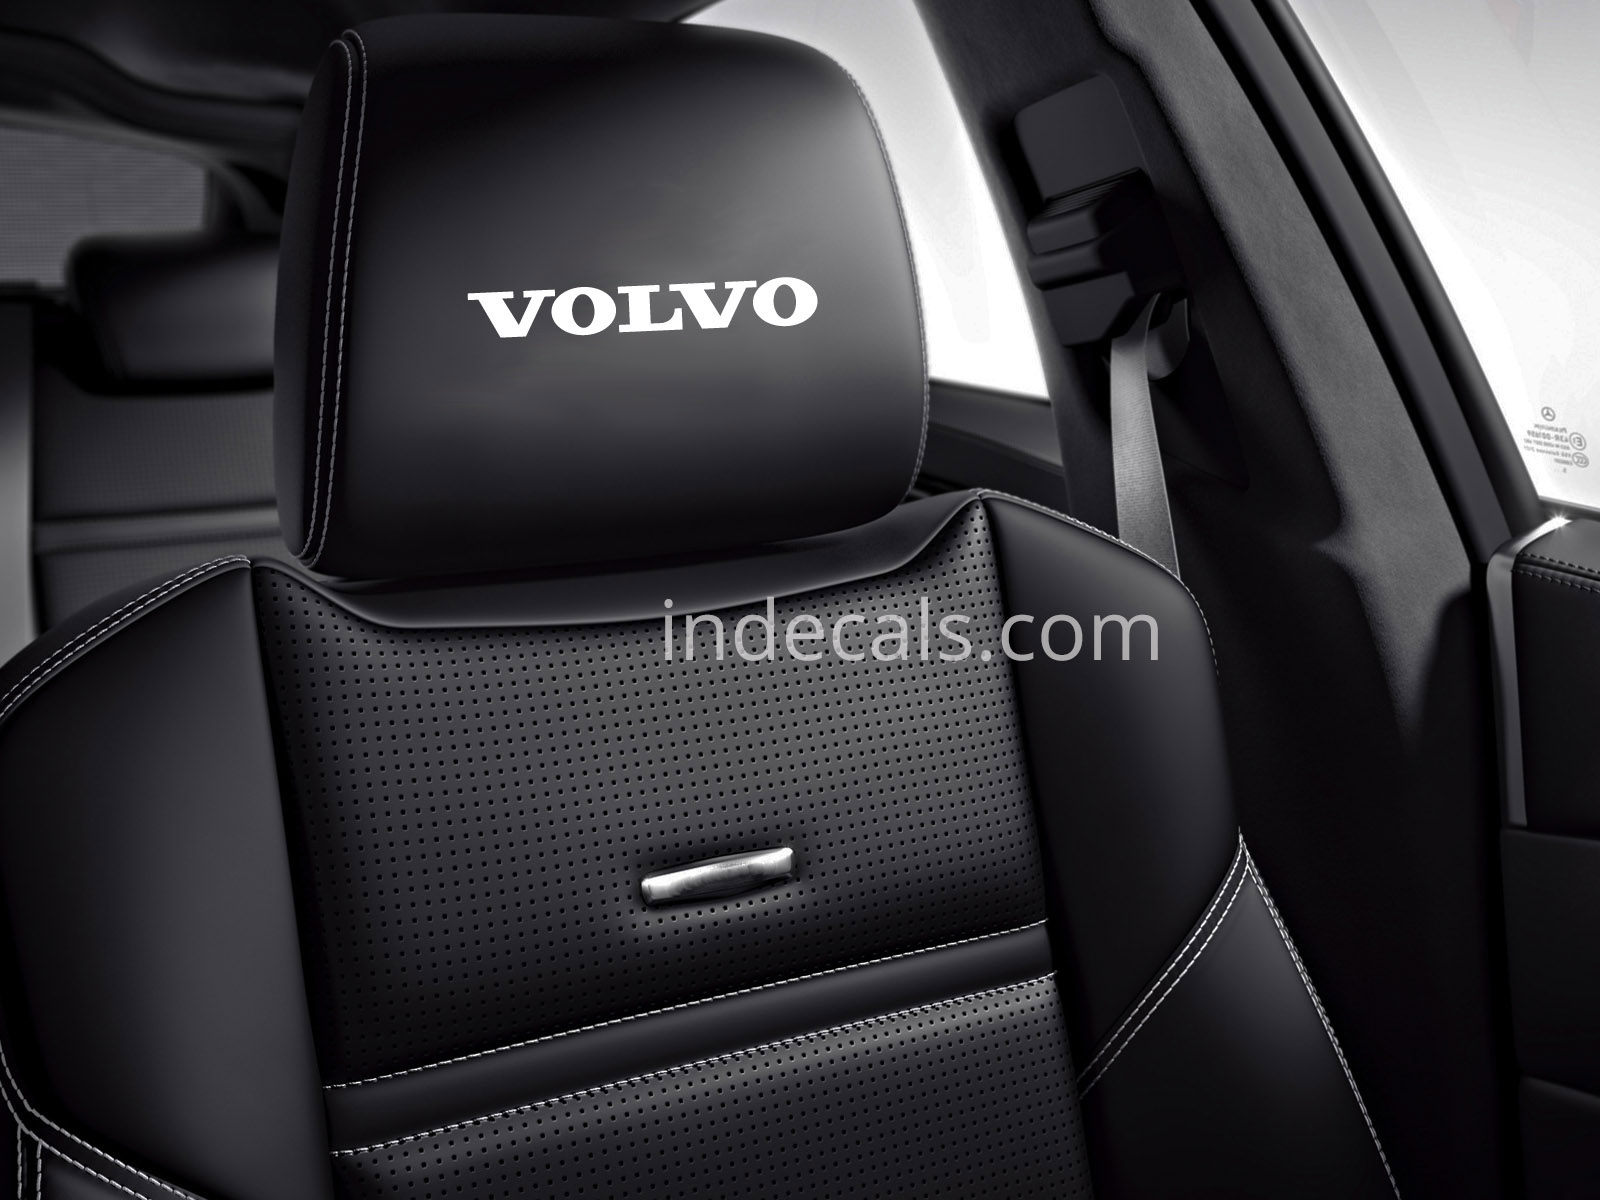 6 x Volvo Stickers for Headrests - White